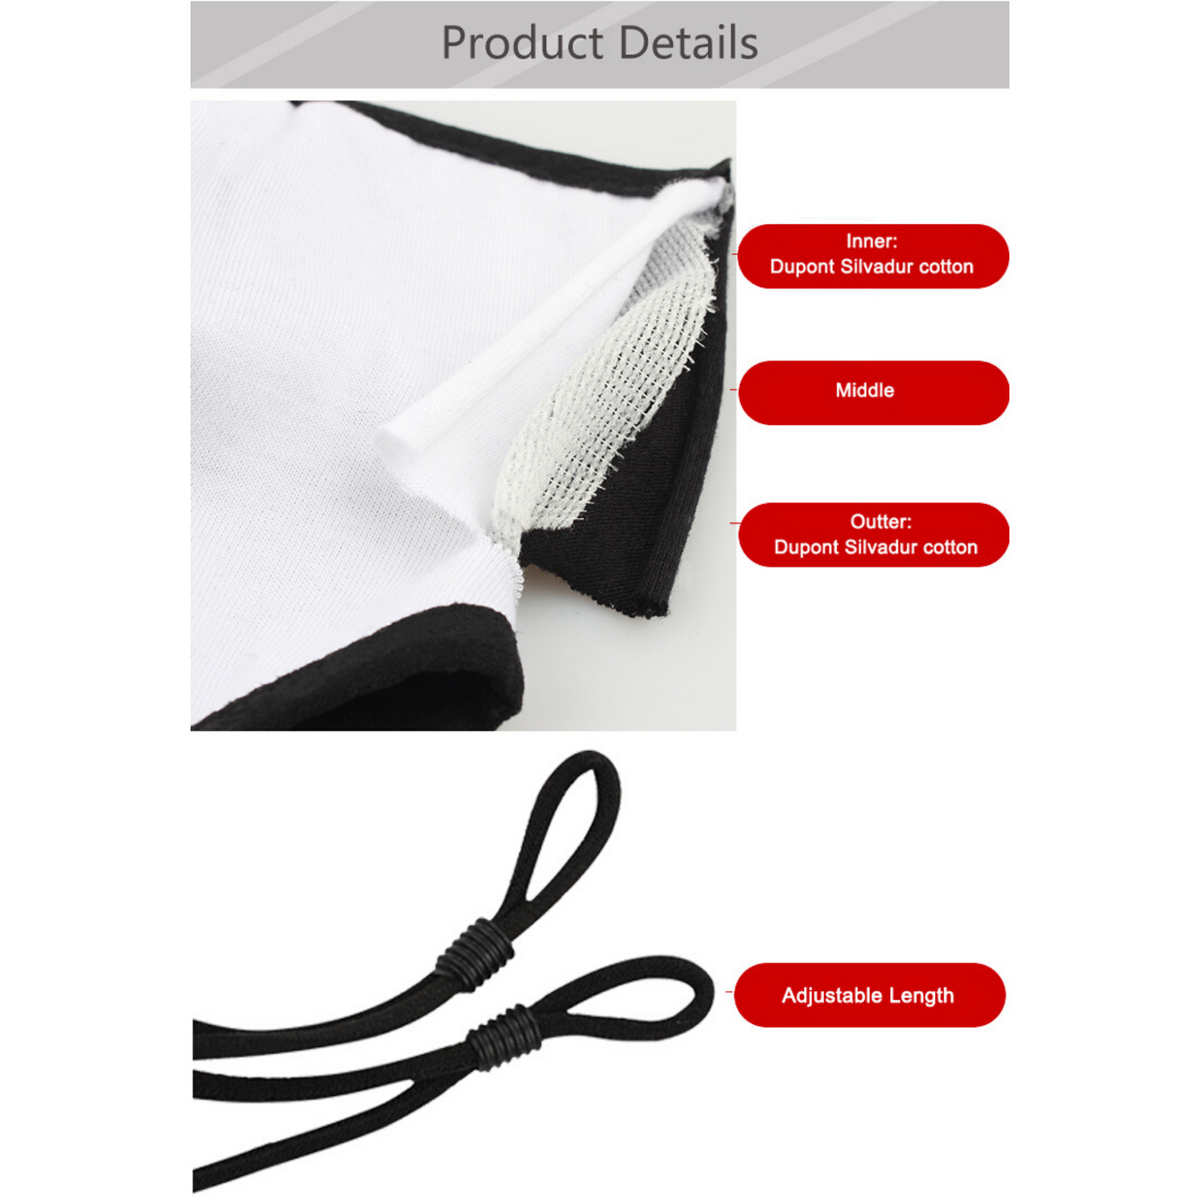 DuPont Antimicrobial 3-layer Cloth Mask with Adjustable Earloops